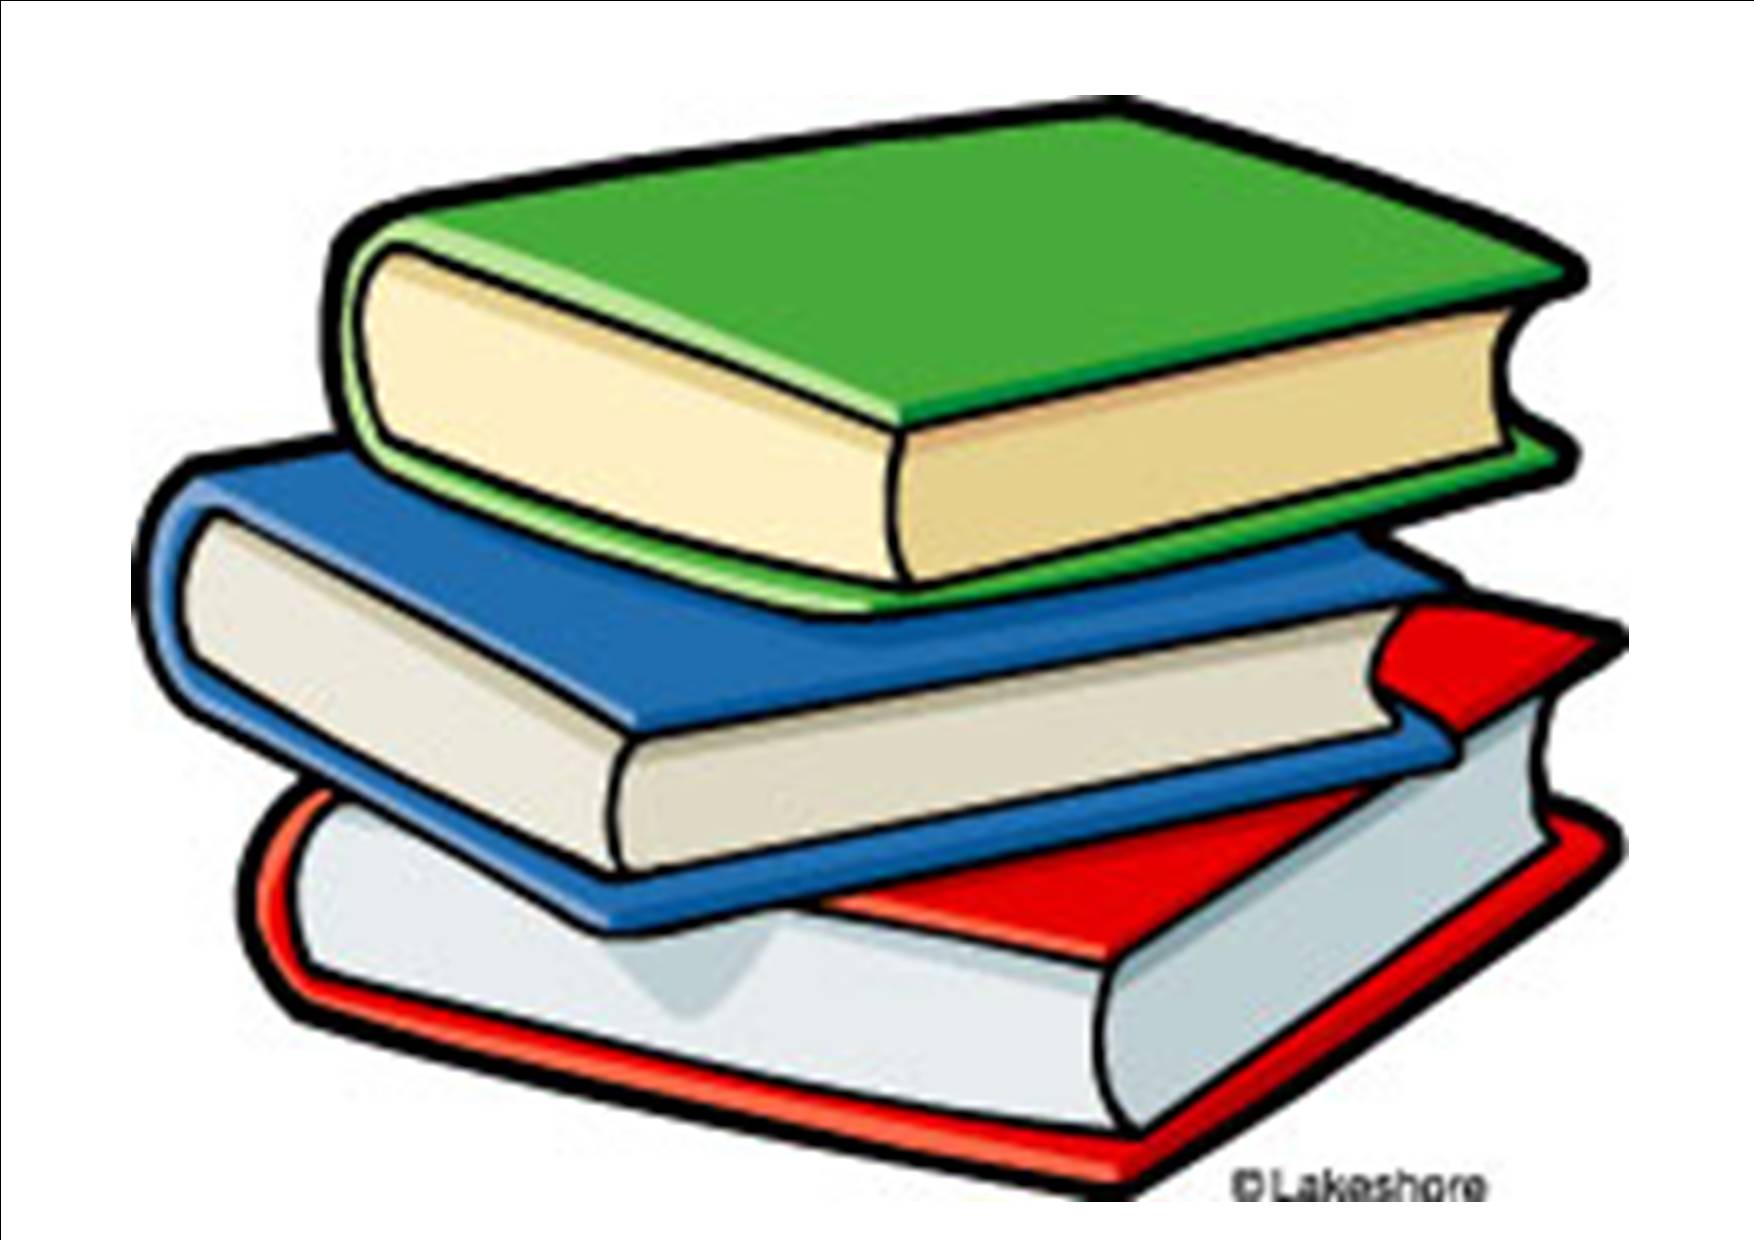 Stack Of Books Clipart Black 